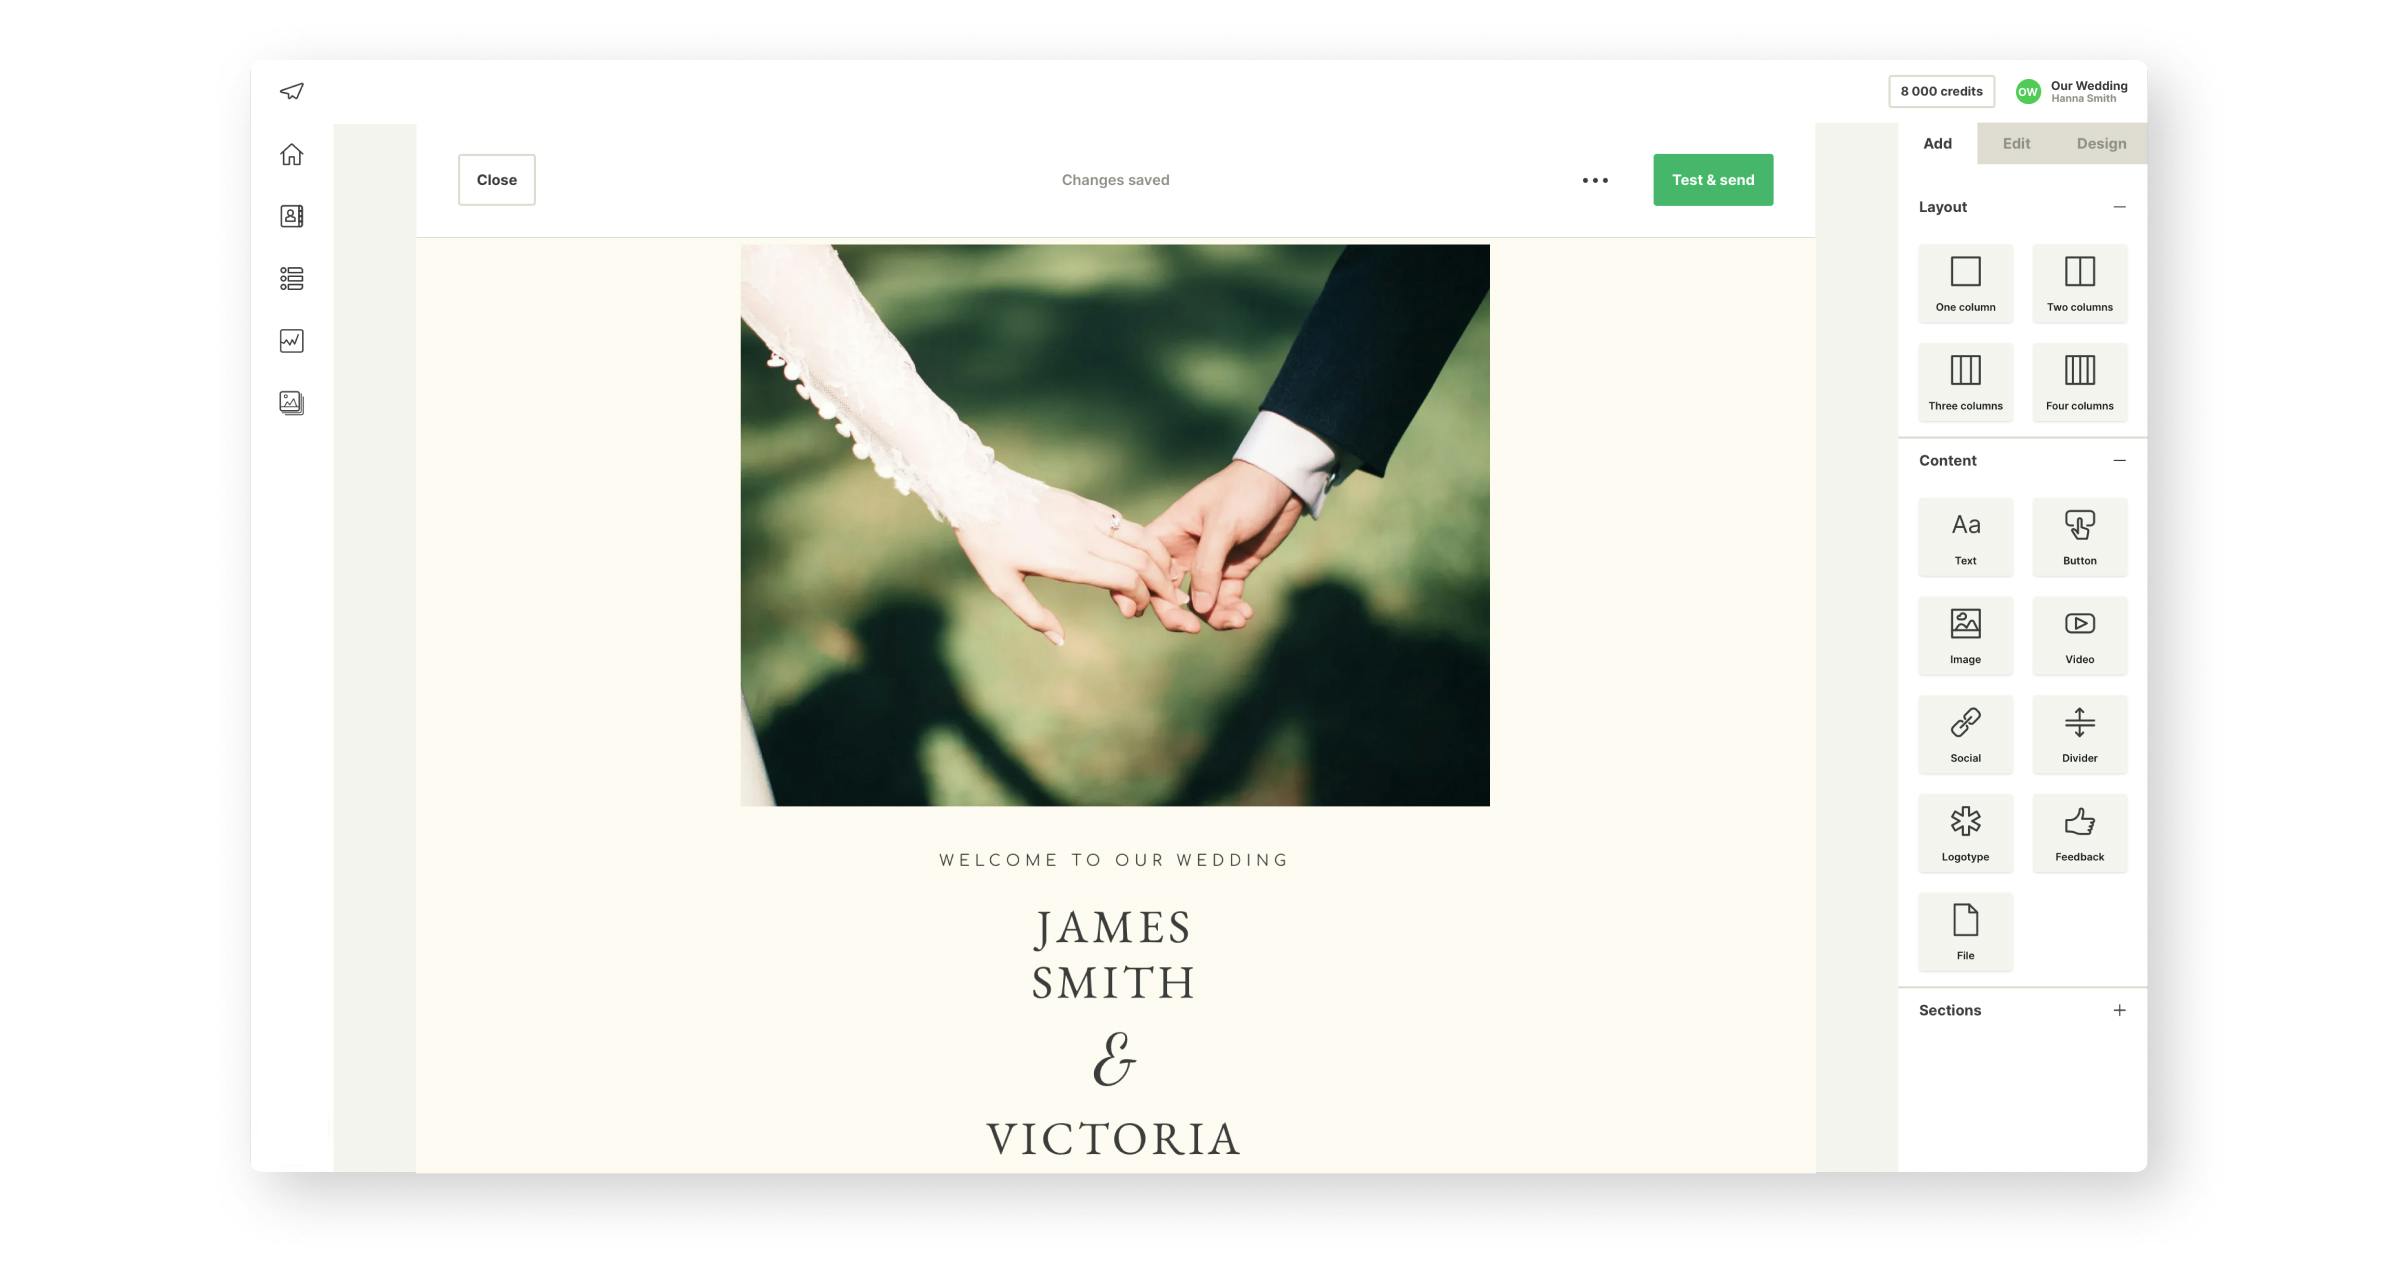 Send a Beautiful Wedding Invitation Today - Minutemailer